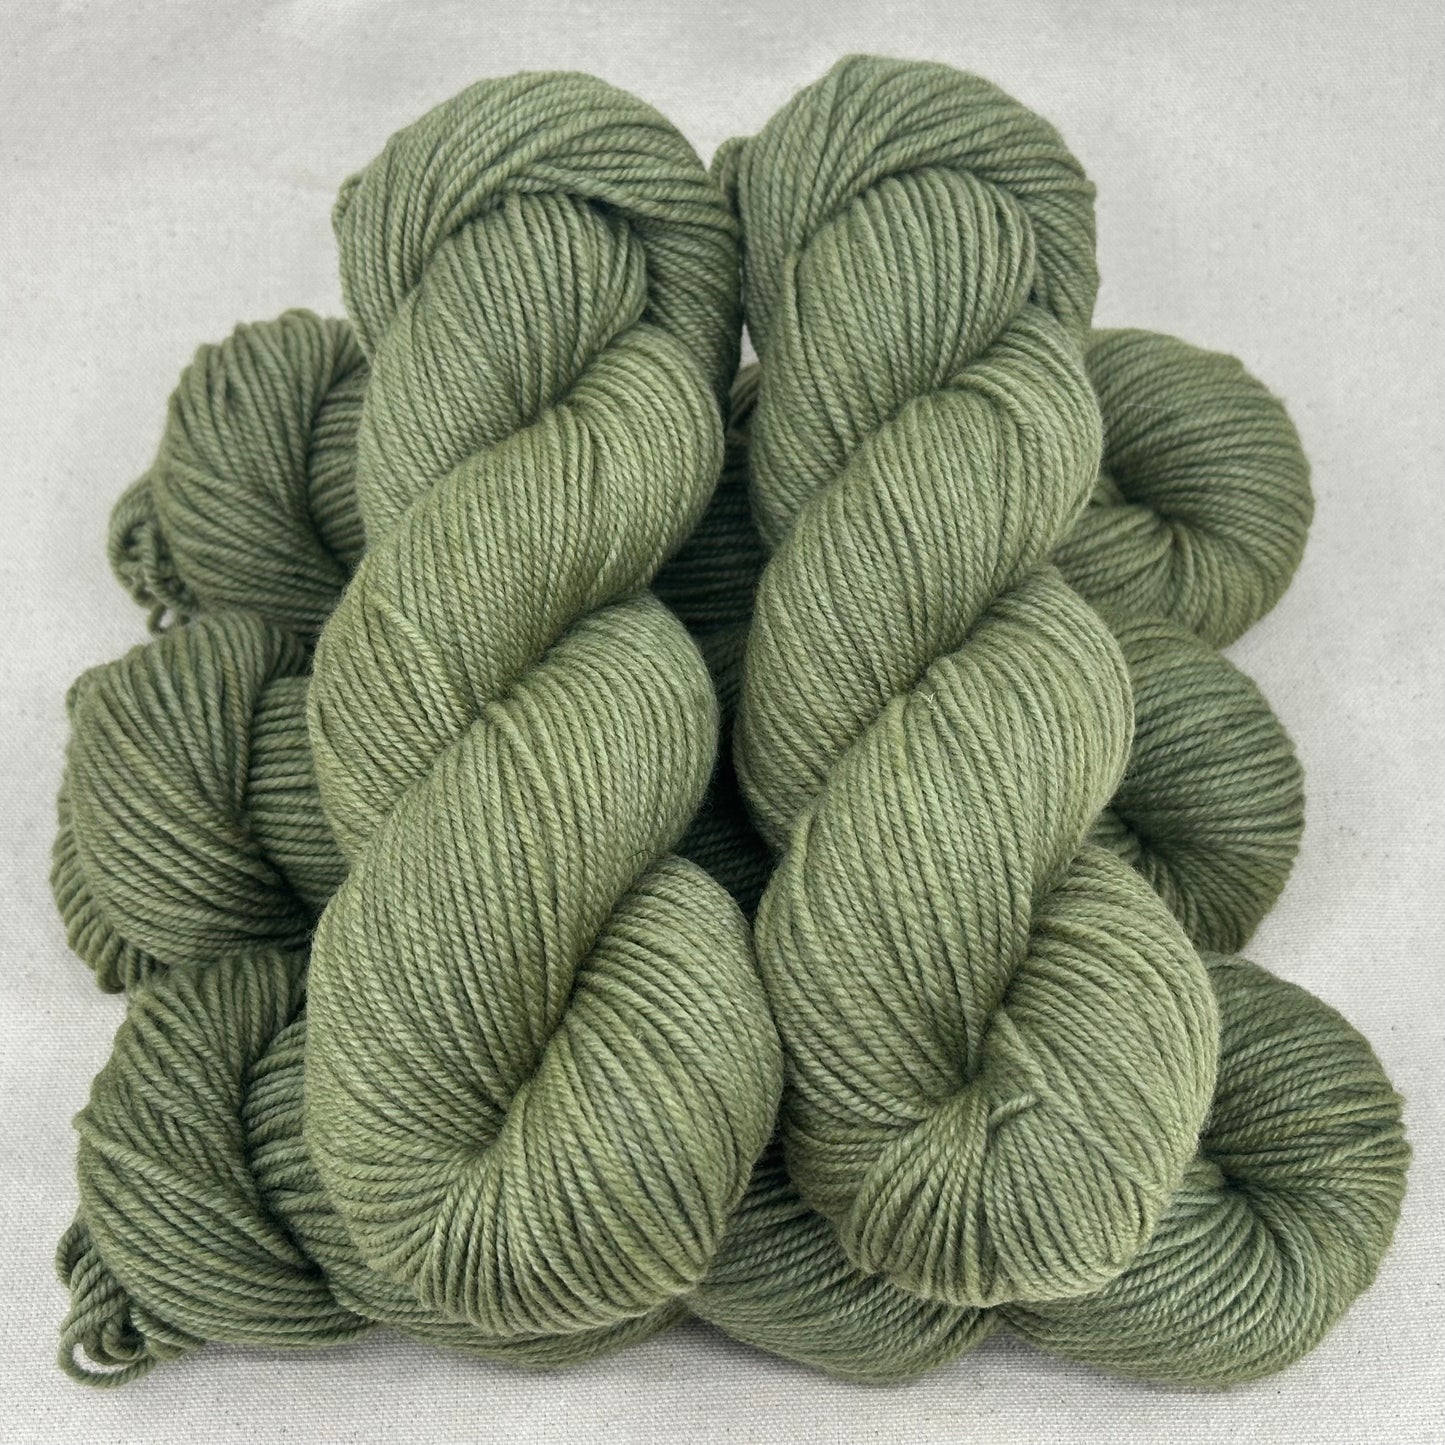 Ghost Town Light Worsted - Mossy